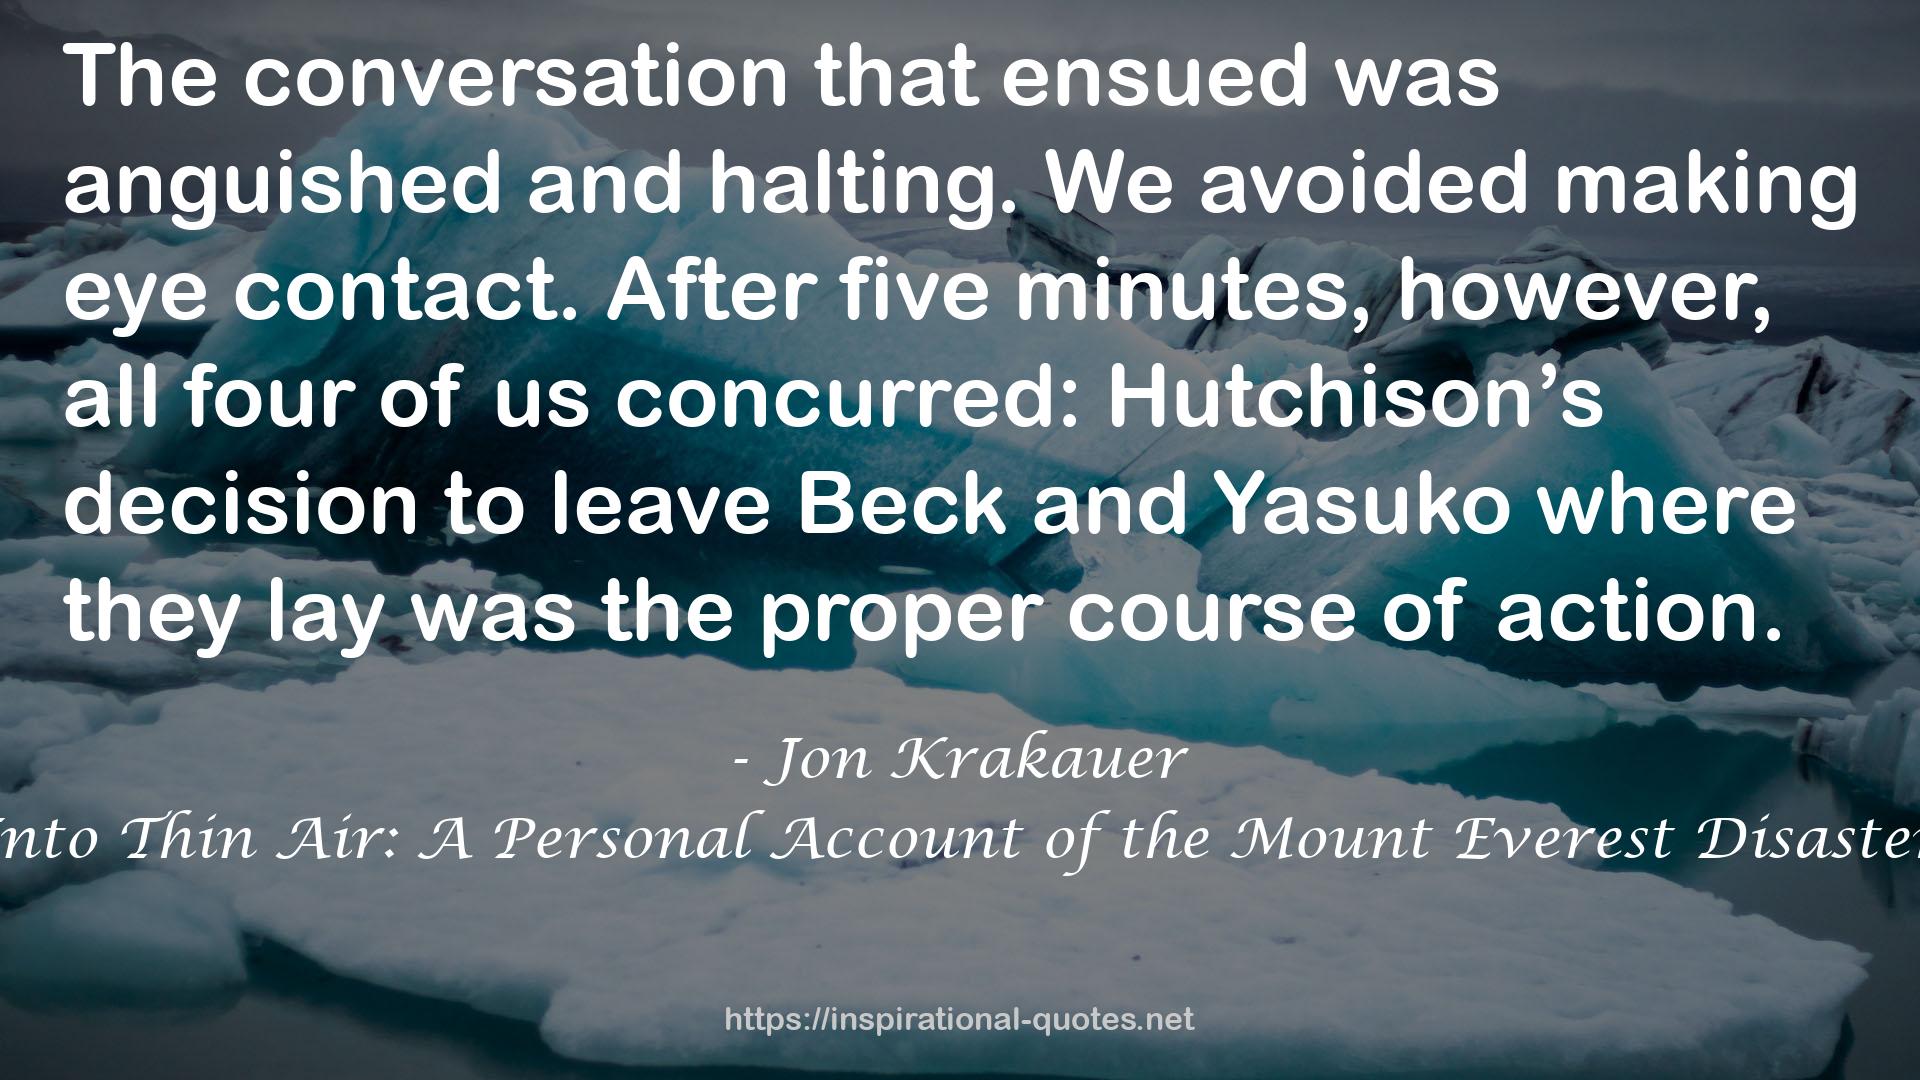 Into Thin Air: A Personal Account of the Mount Everest Disaster QUOTES